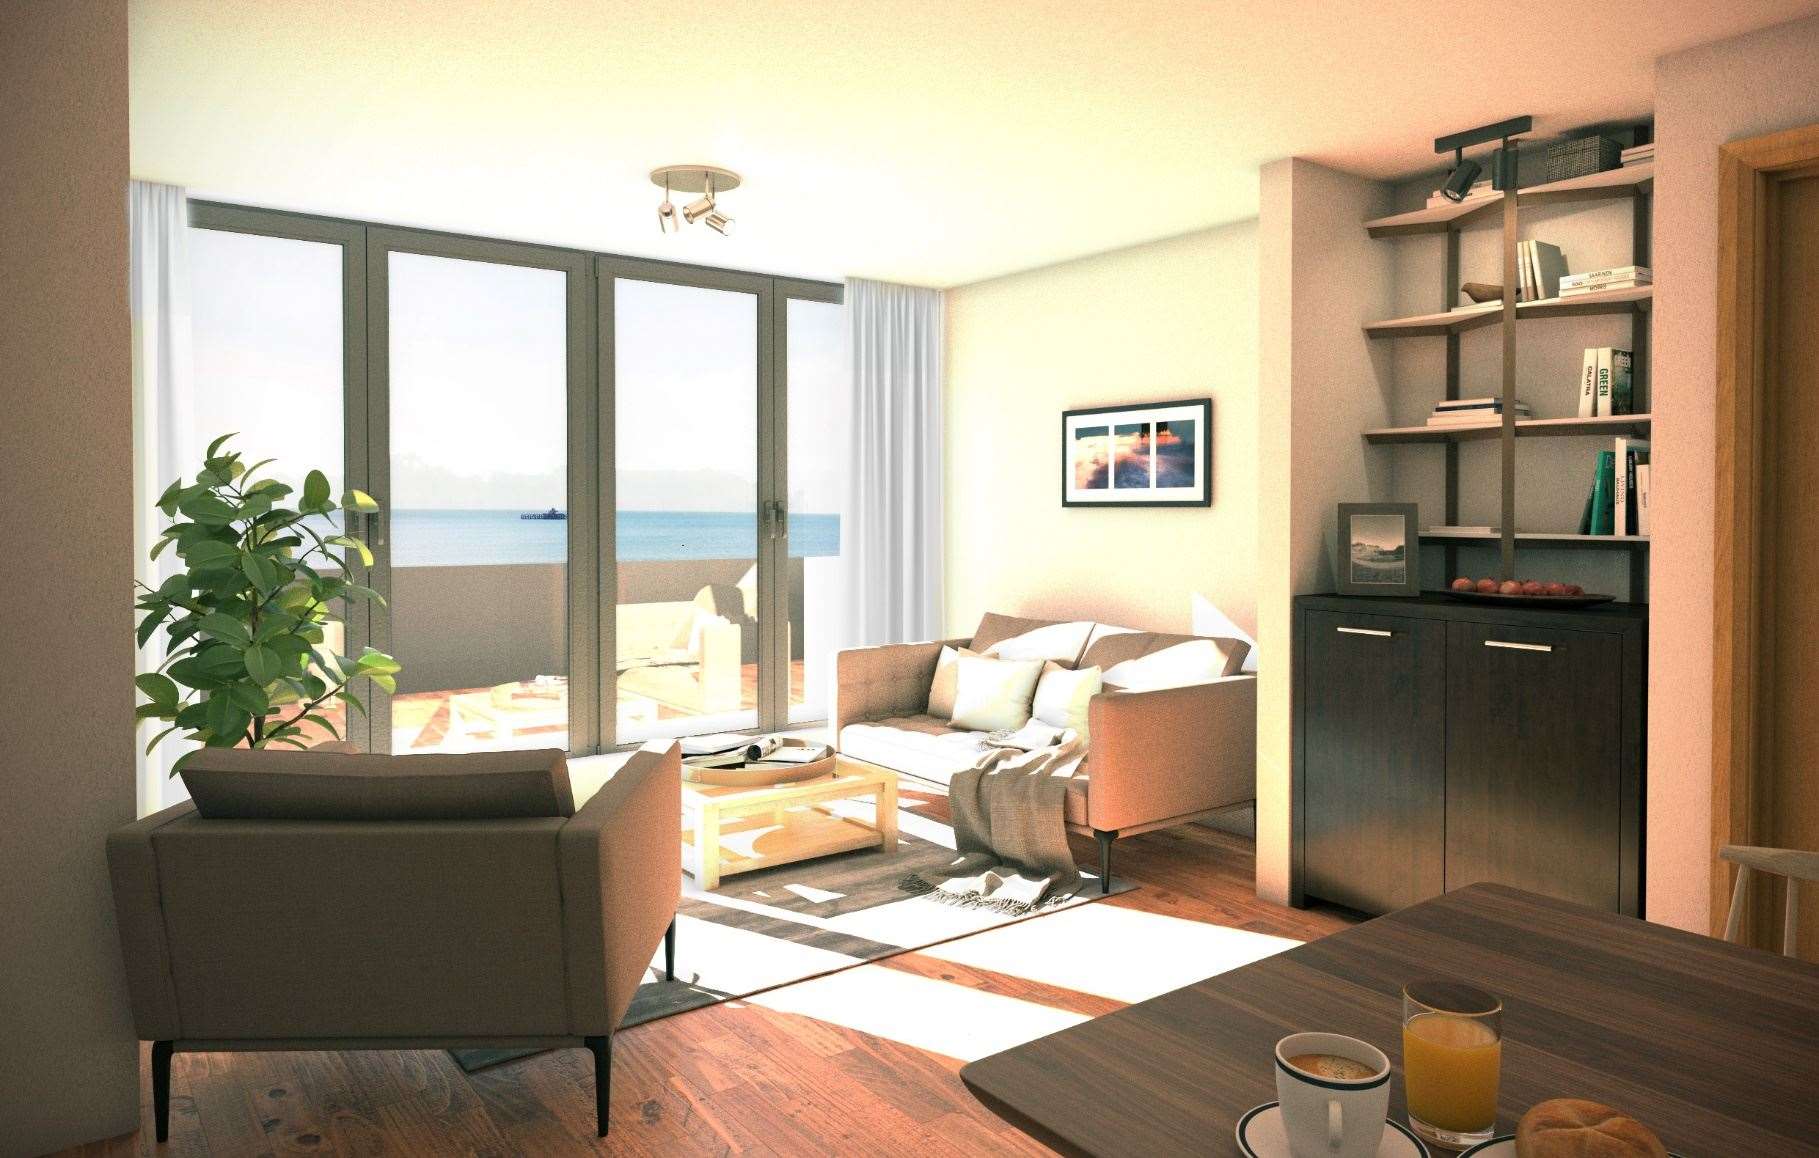 The Herne Bay scheme will include one, two and three-bedroom apartments, each with its own sea view. Photo: Miles & Barr